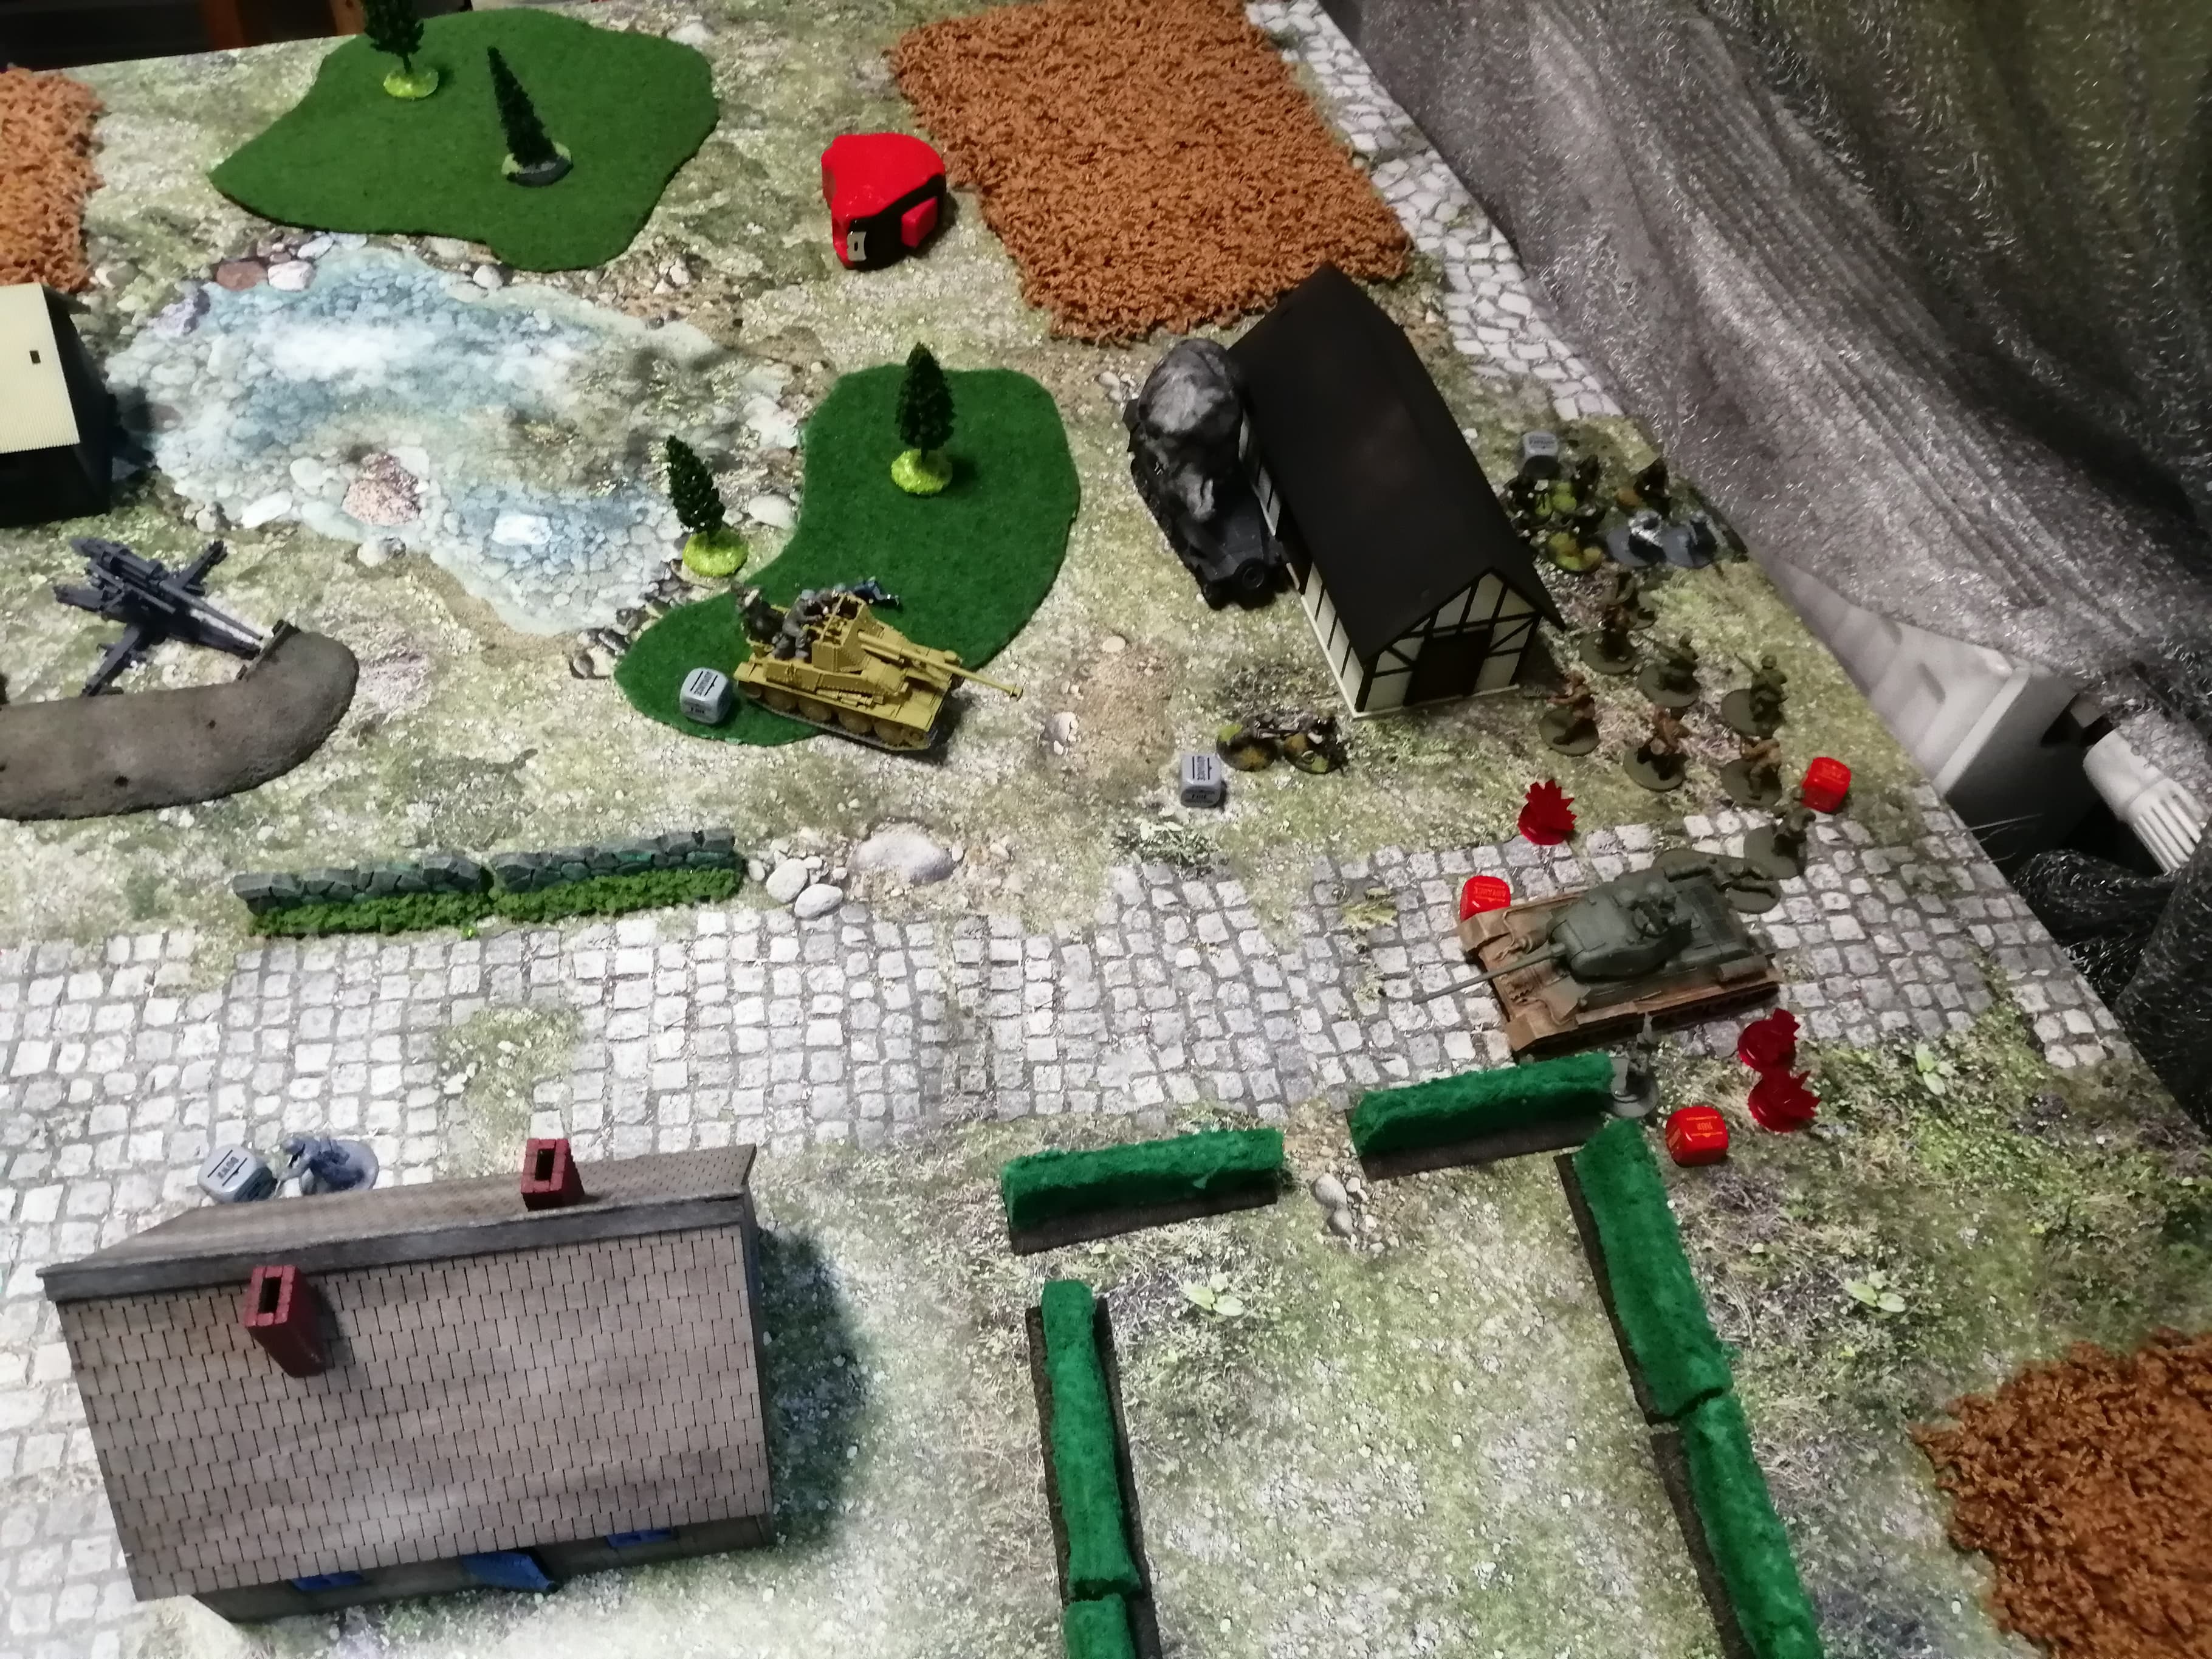 12 Army versus part of 7th army in a fierce infantry engagement